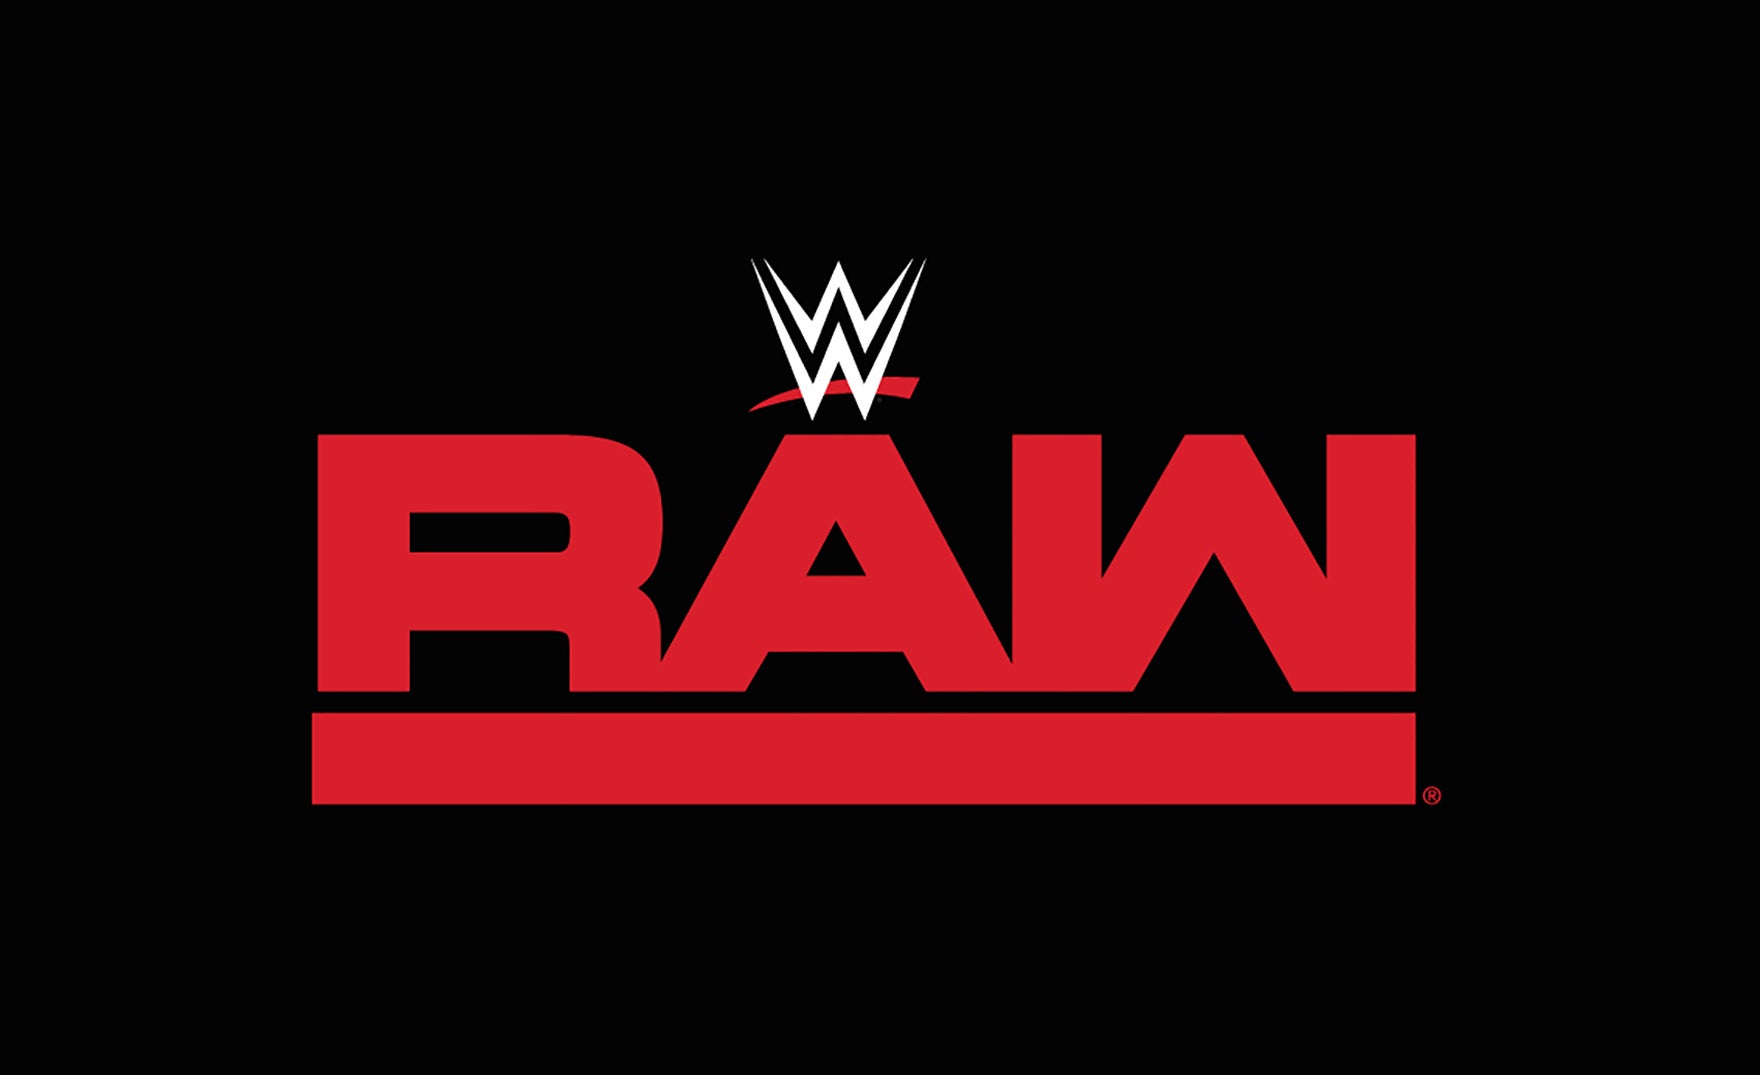 WWE Raw Live PPG Paints Arena